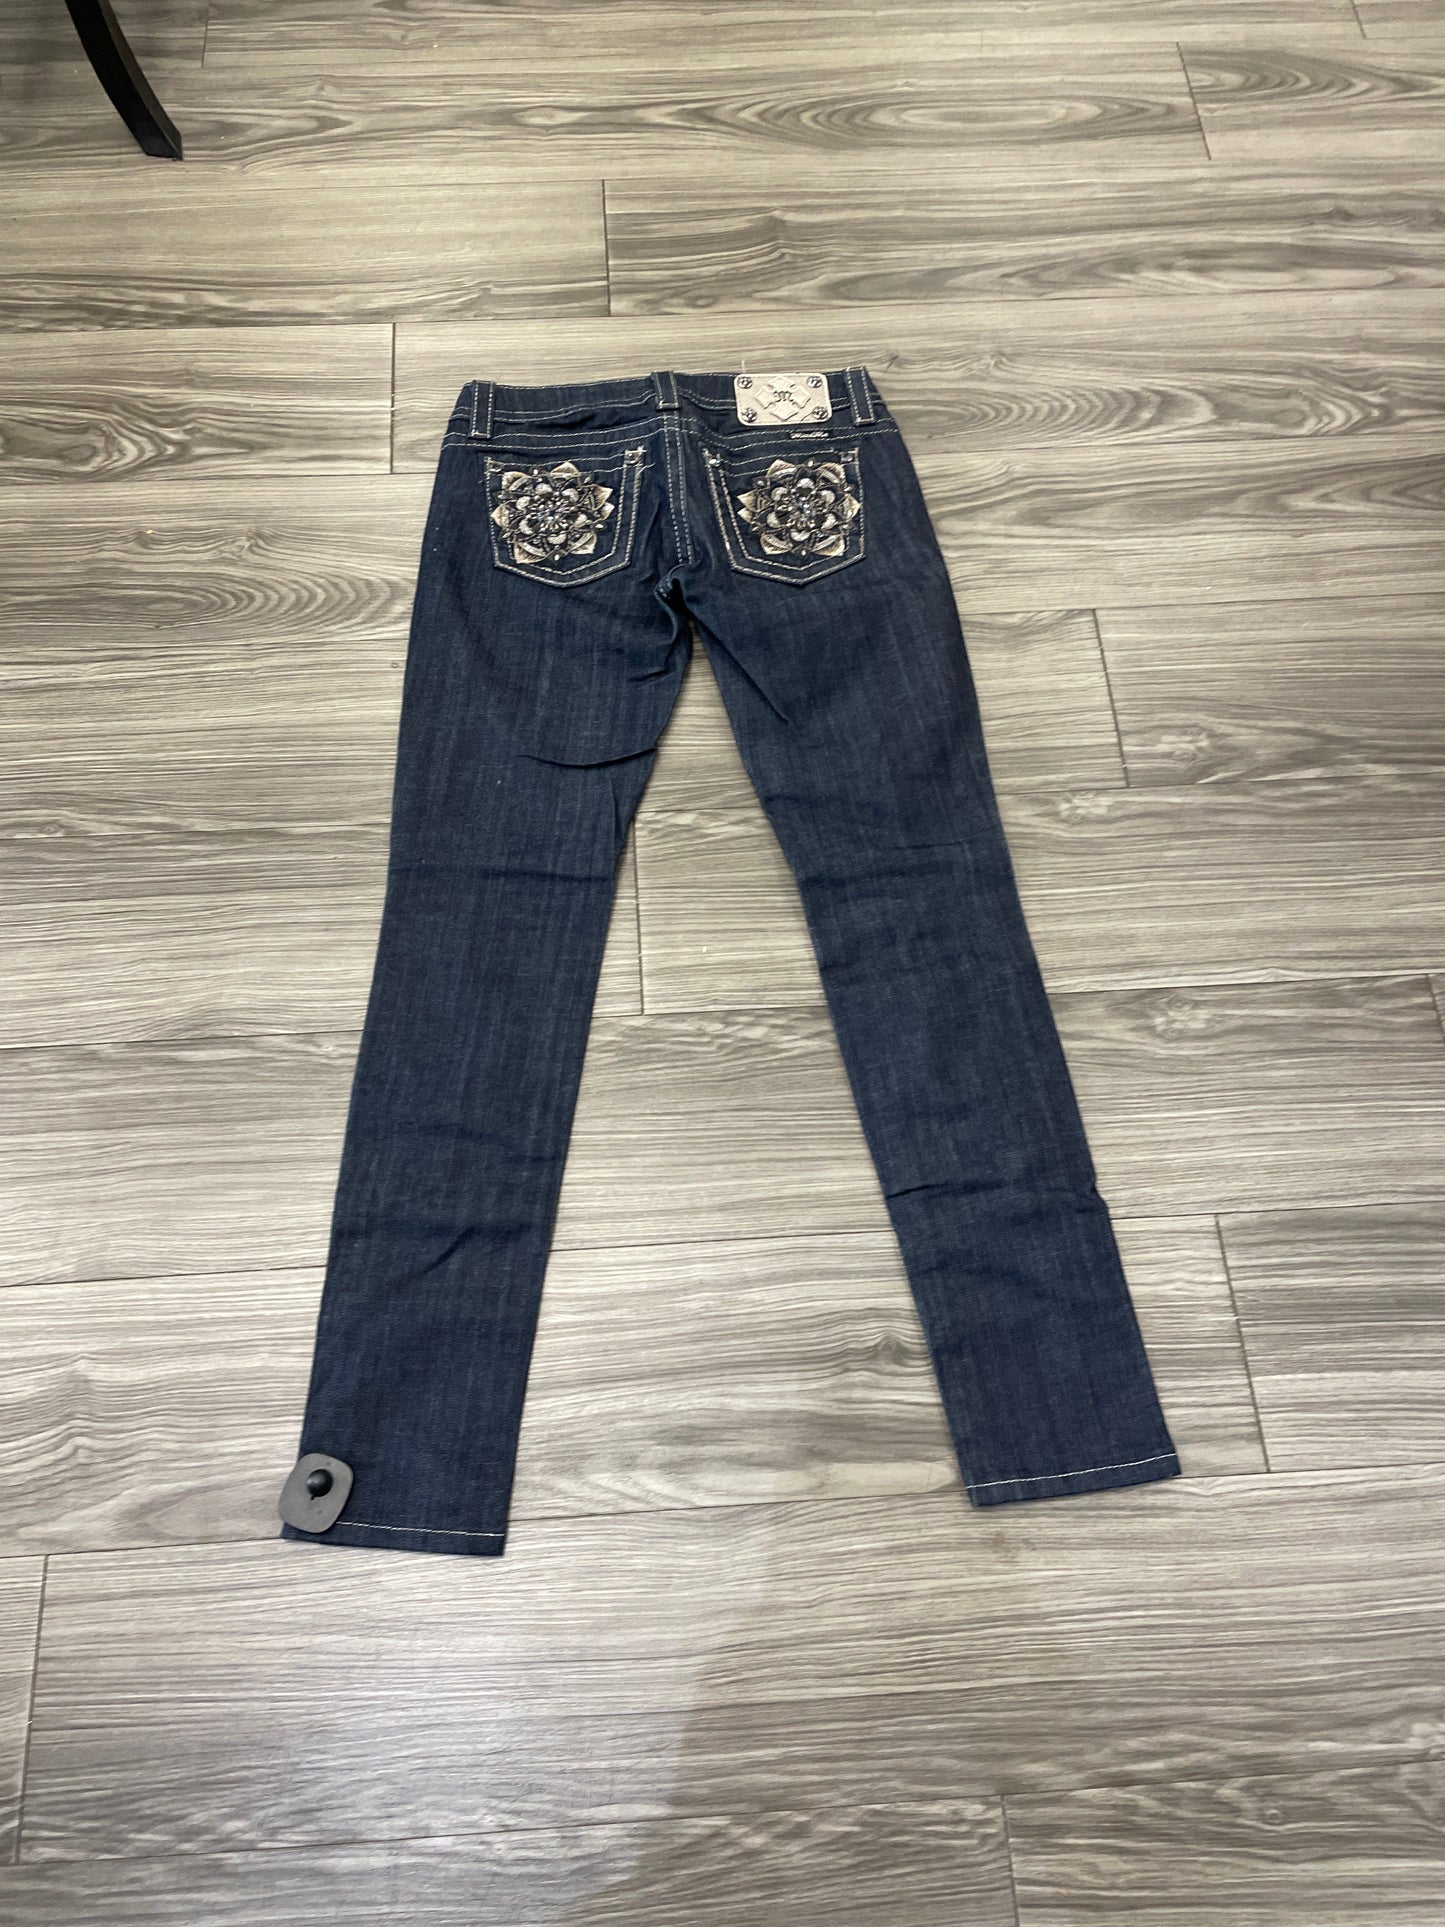 Jeans Skinny By Miss Me  Size: 4